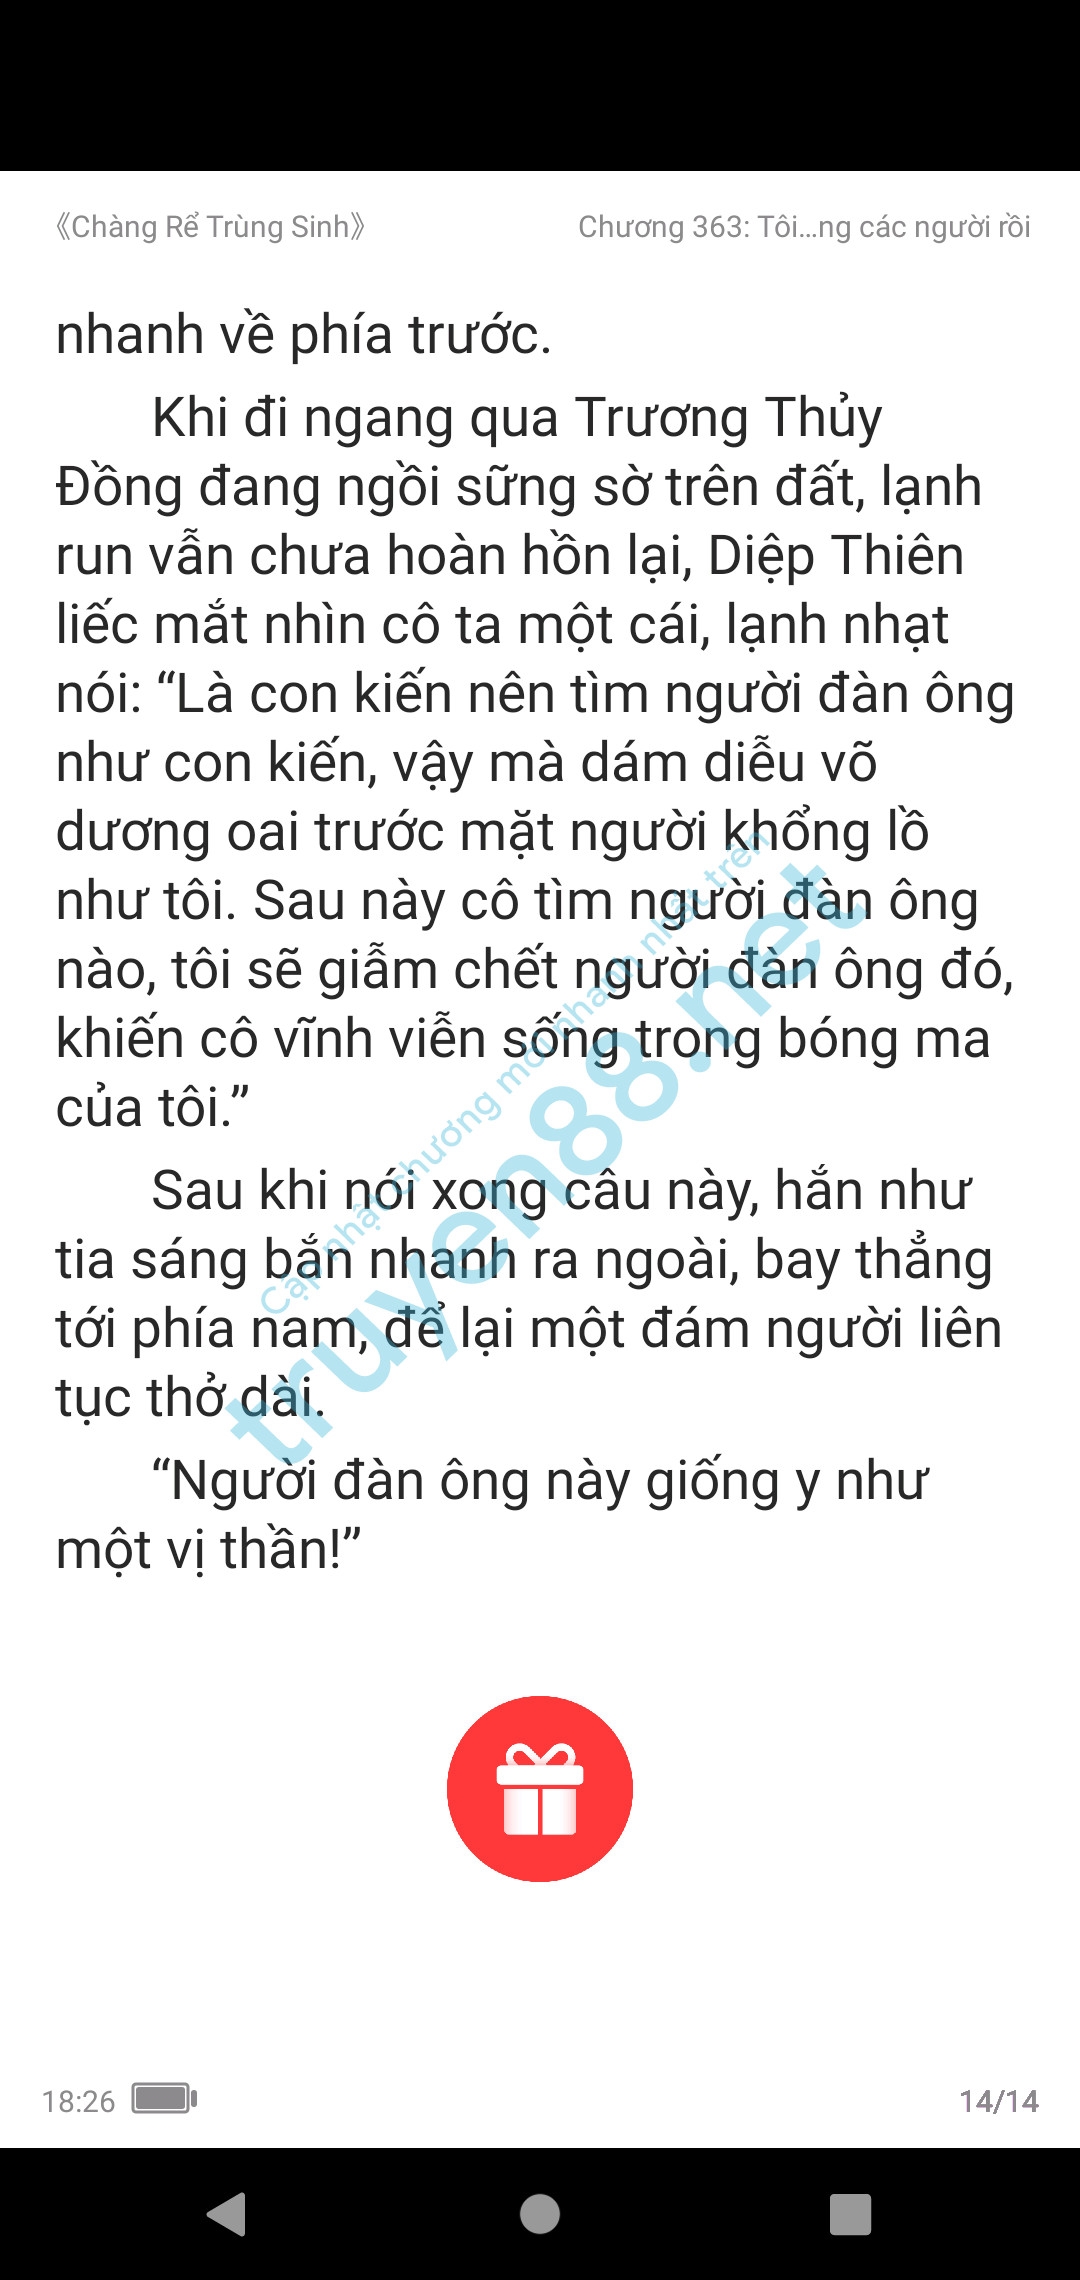 chang-re-trung-sinh-363-1